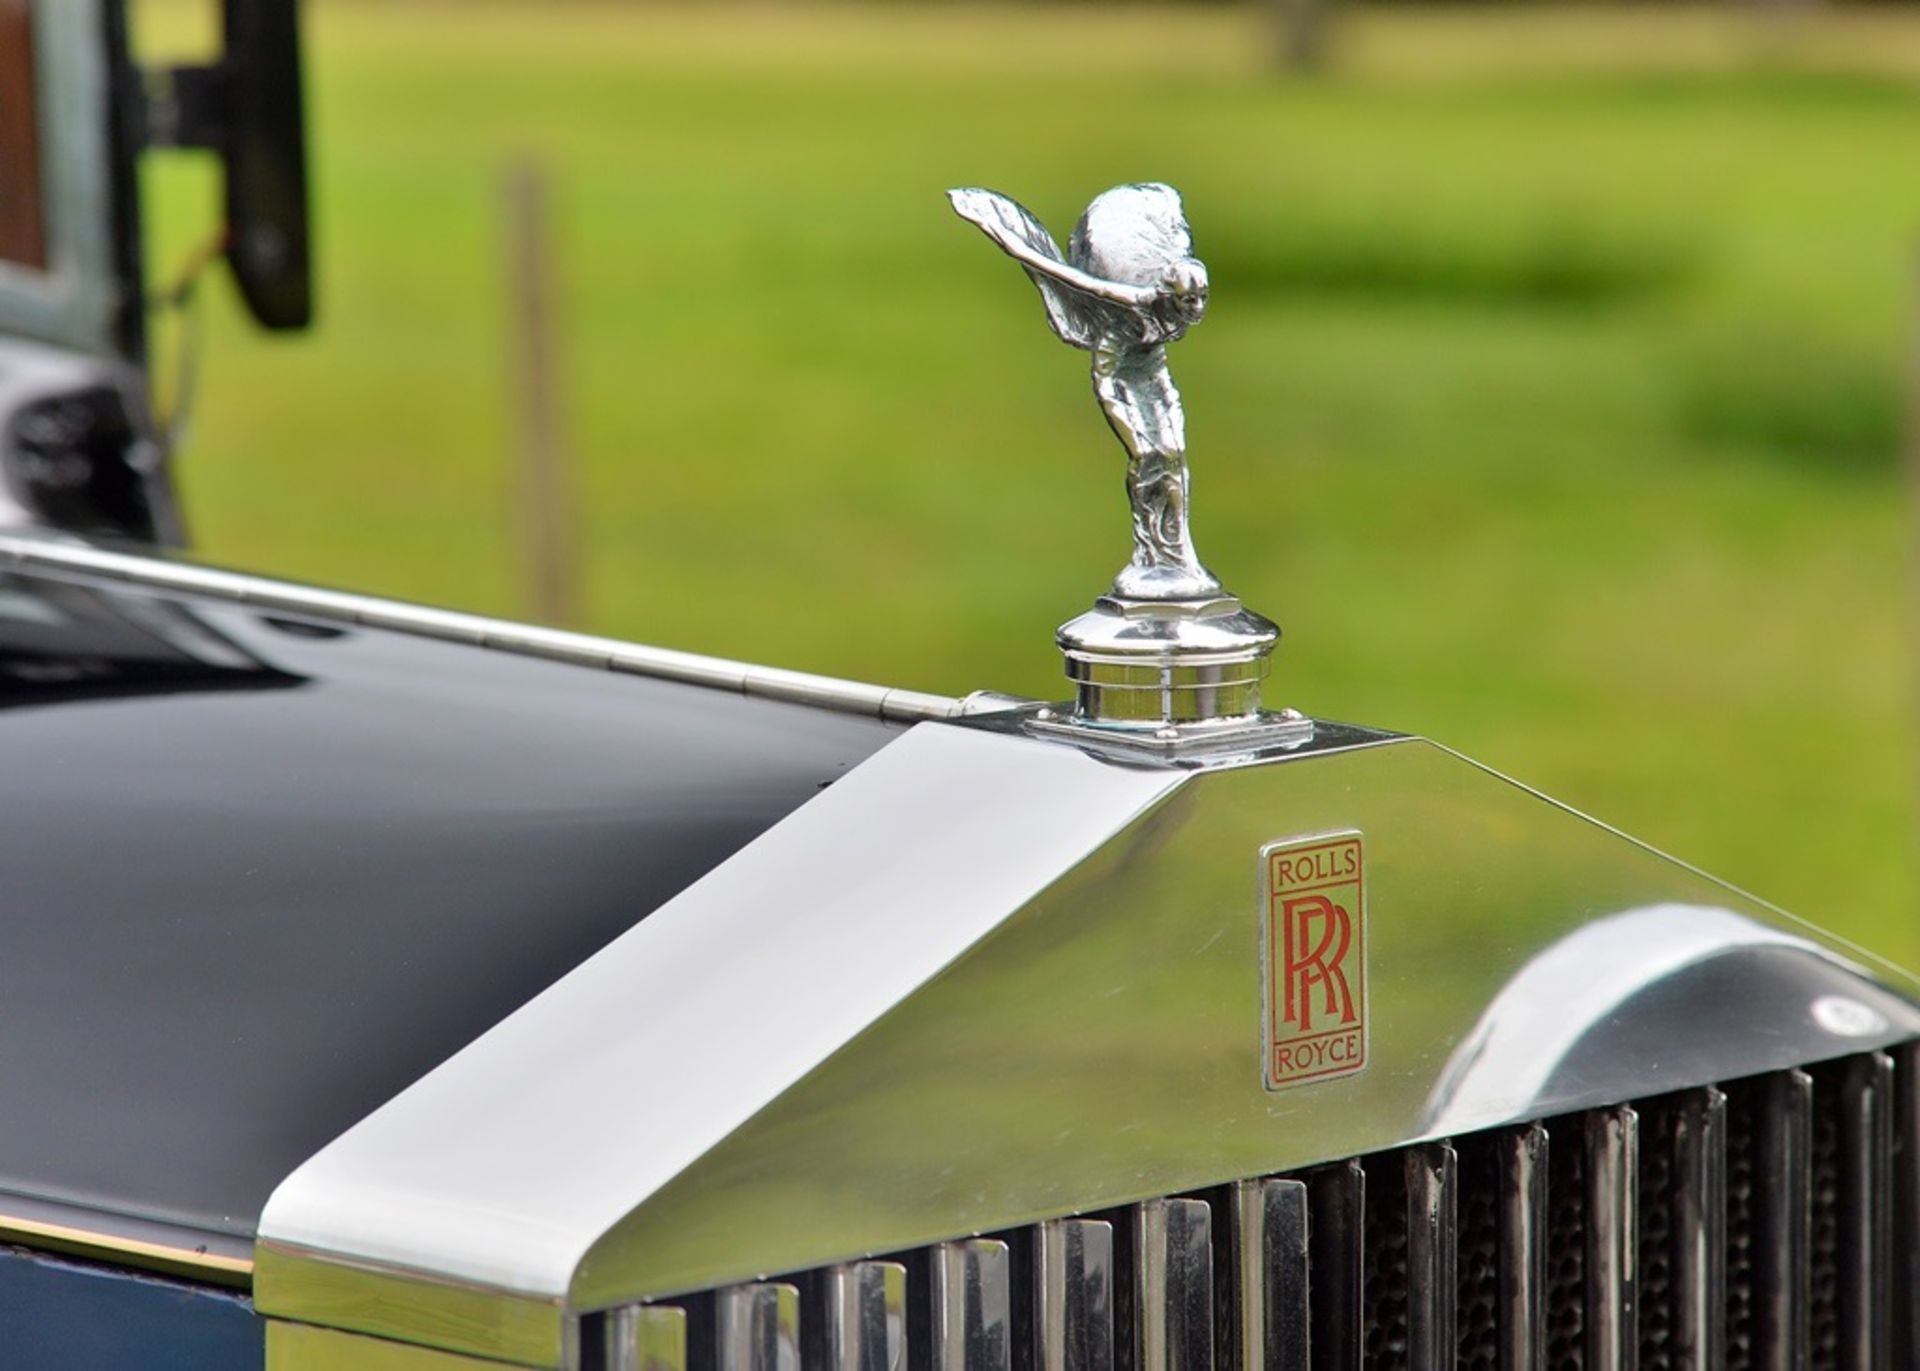 1932 Rolls-Royce 20/25 Limousine by Crosbie & Dunn - Image 10 of 16